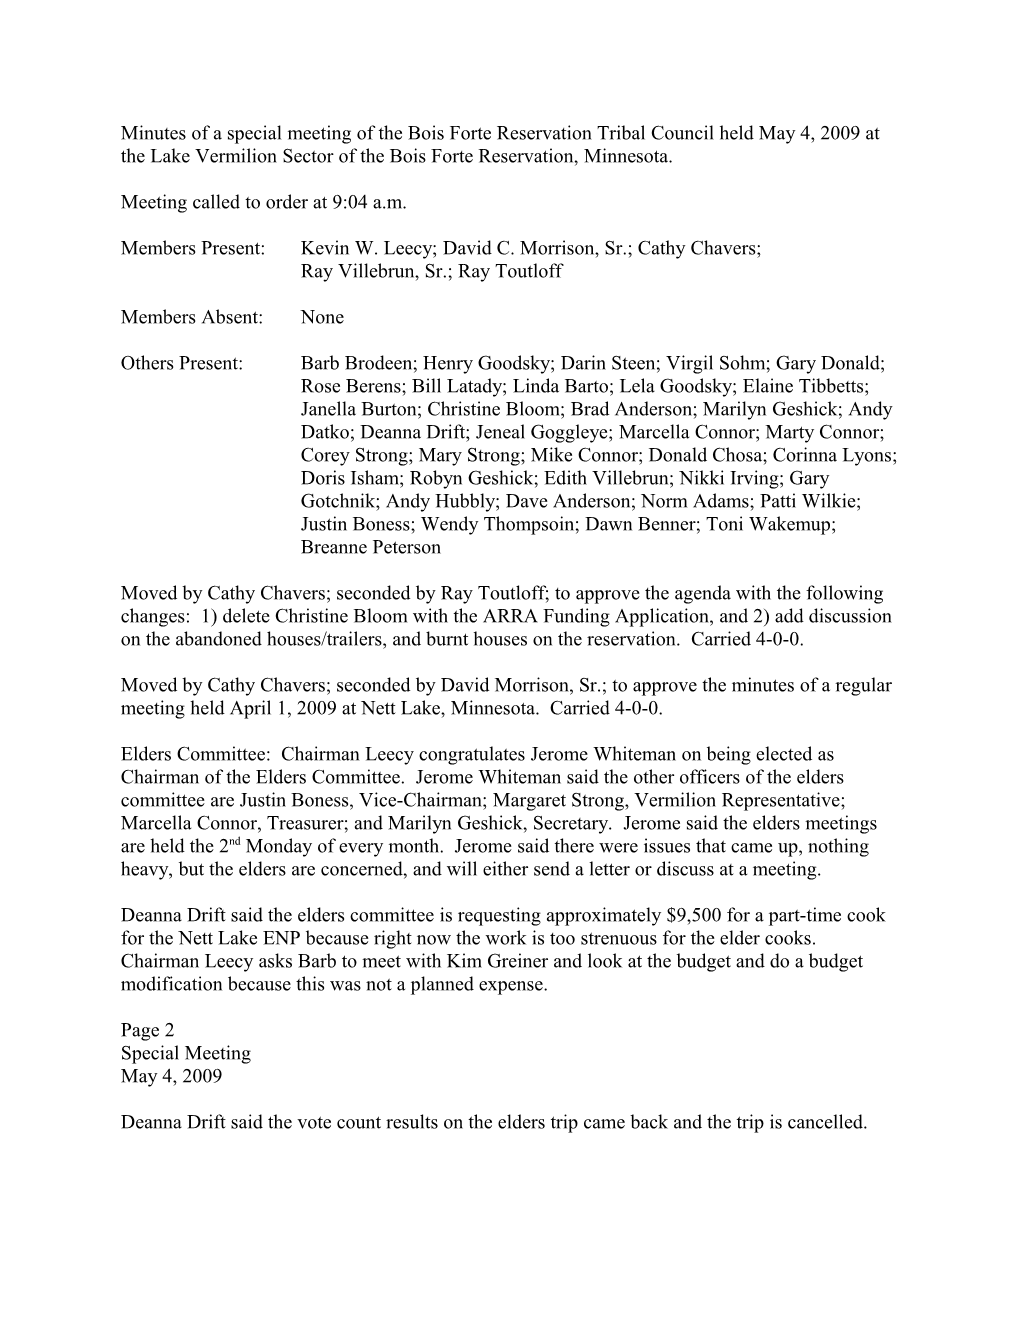 Minutes of a Special Meeting of the Bois Forte Reservation Tribal Council Held May 4, 2009